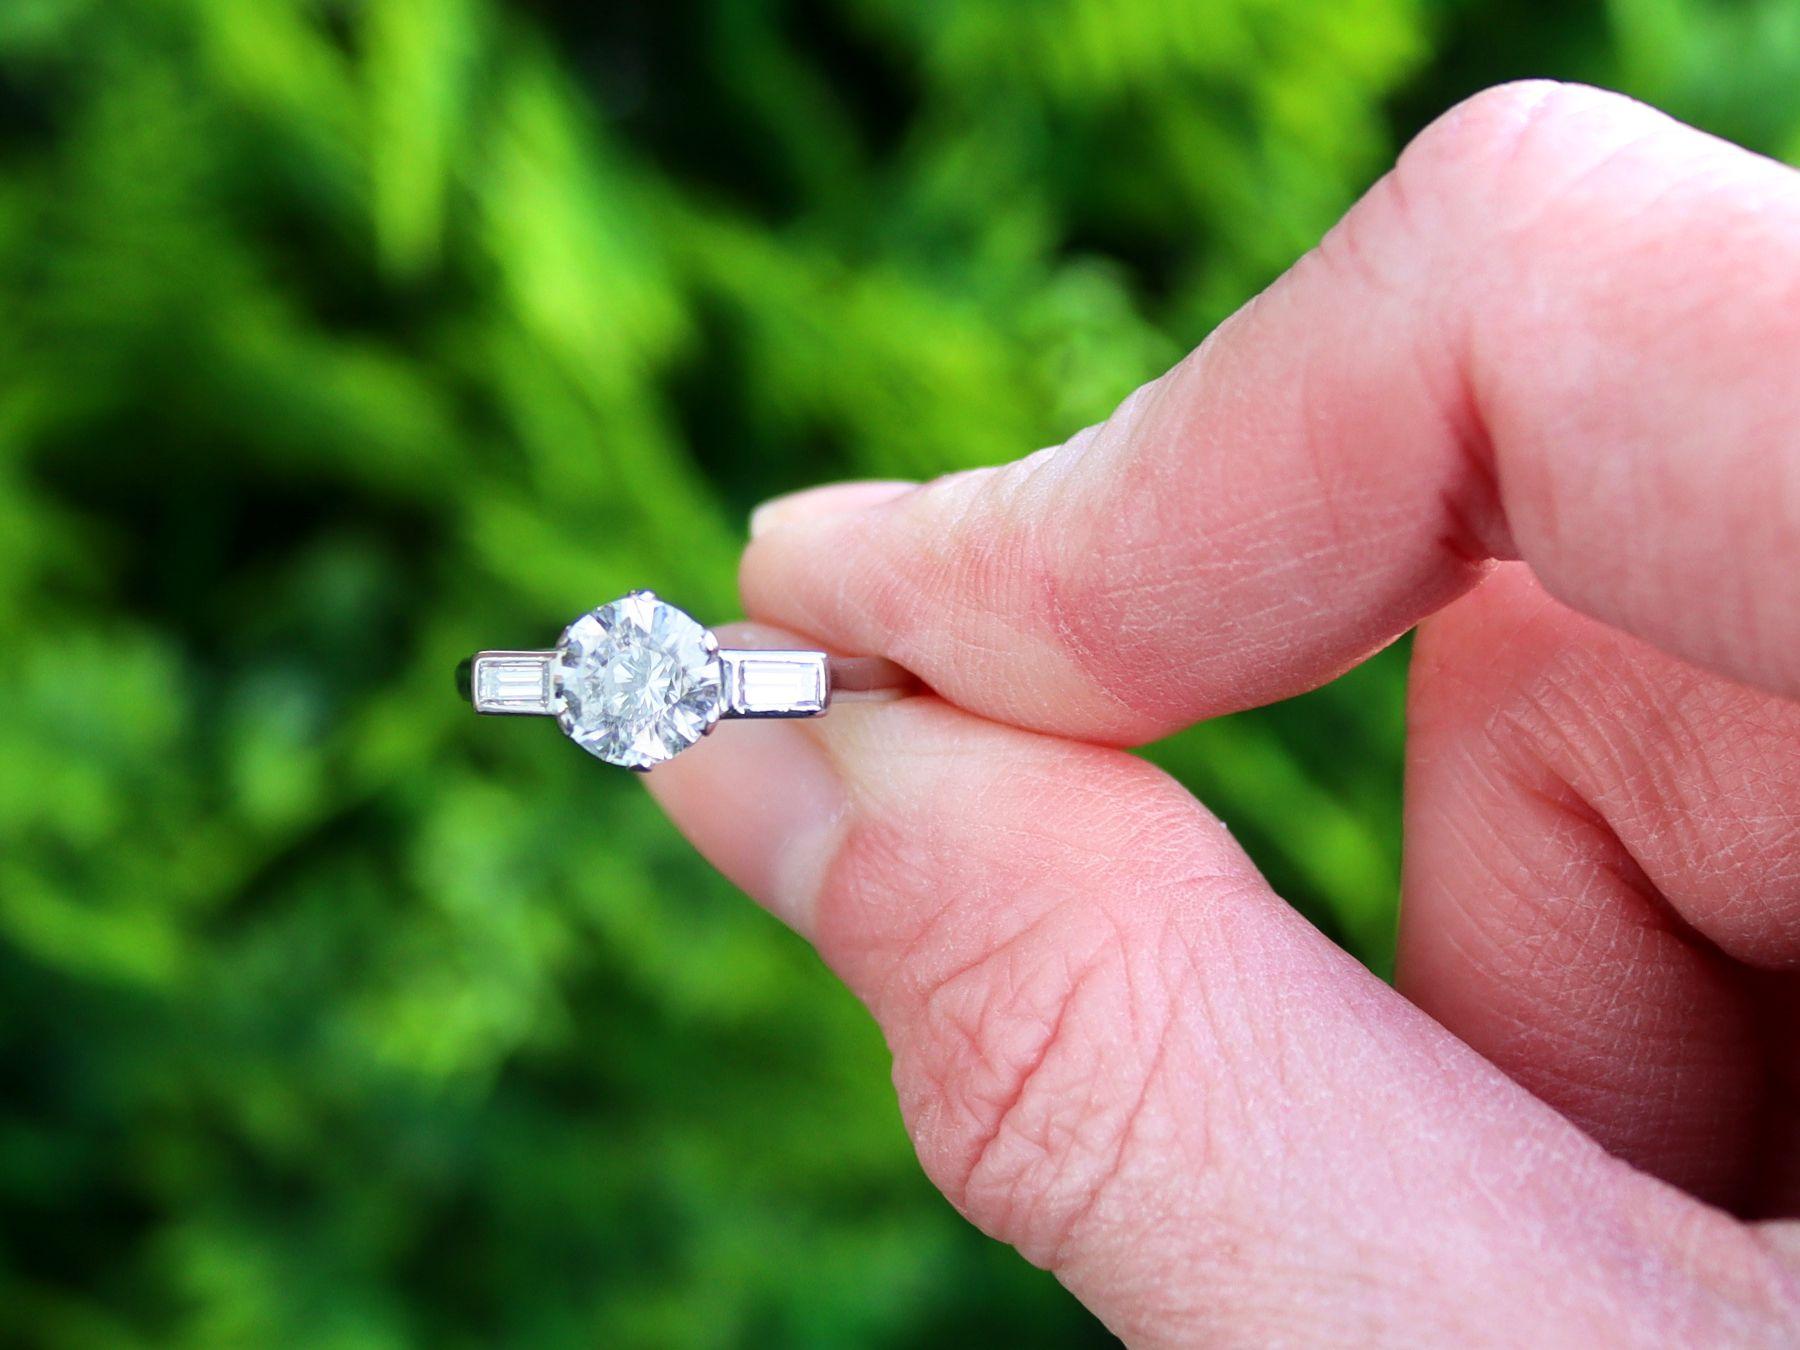 A stunning, fine and impressive vintage 1.28 carat (total) diamond solitaire ring in platinum; part of our antique engagement ring collections.

This stunning, fine and impressive vintage solitaire ring has been crafted in platinum.

The ring